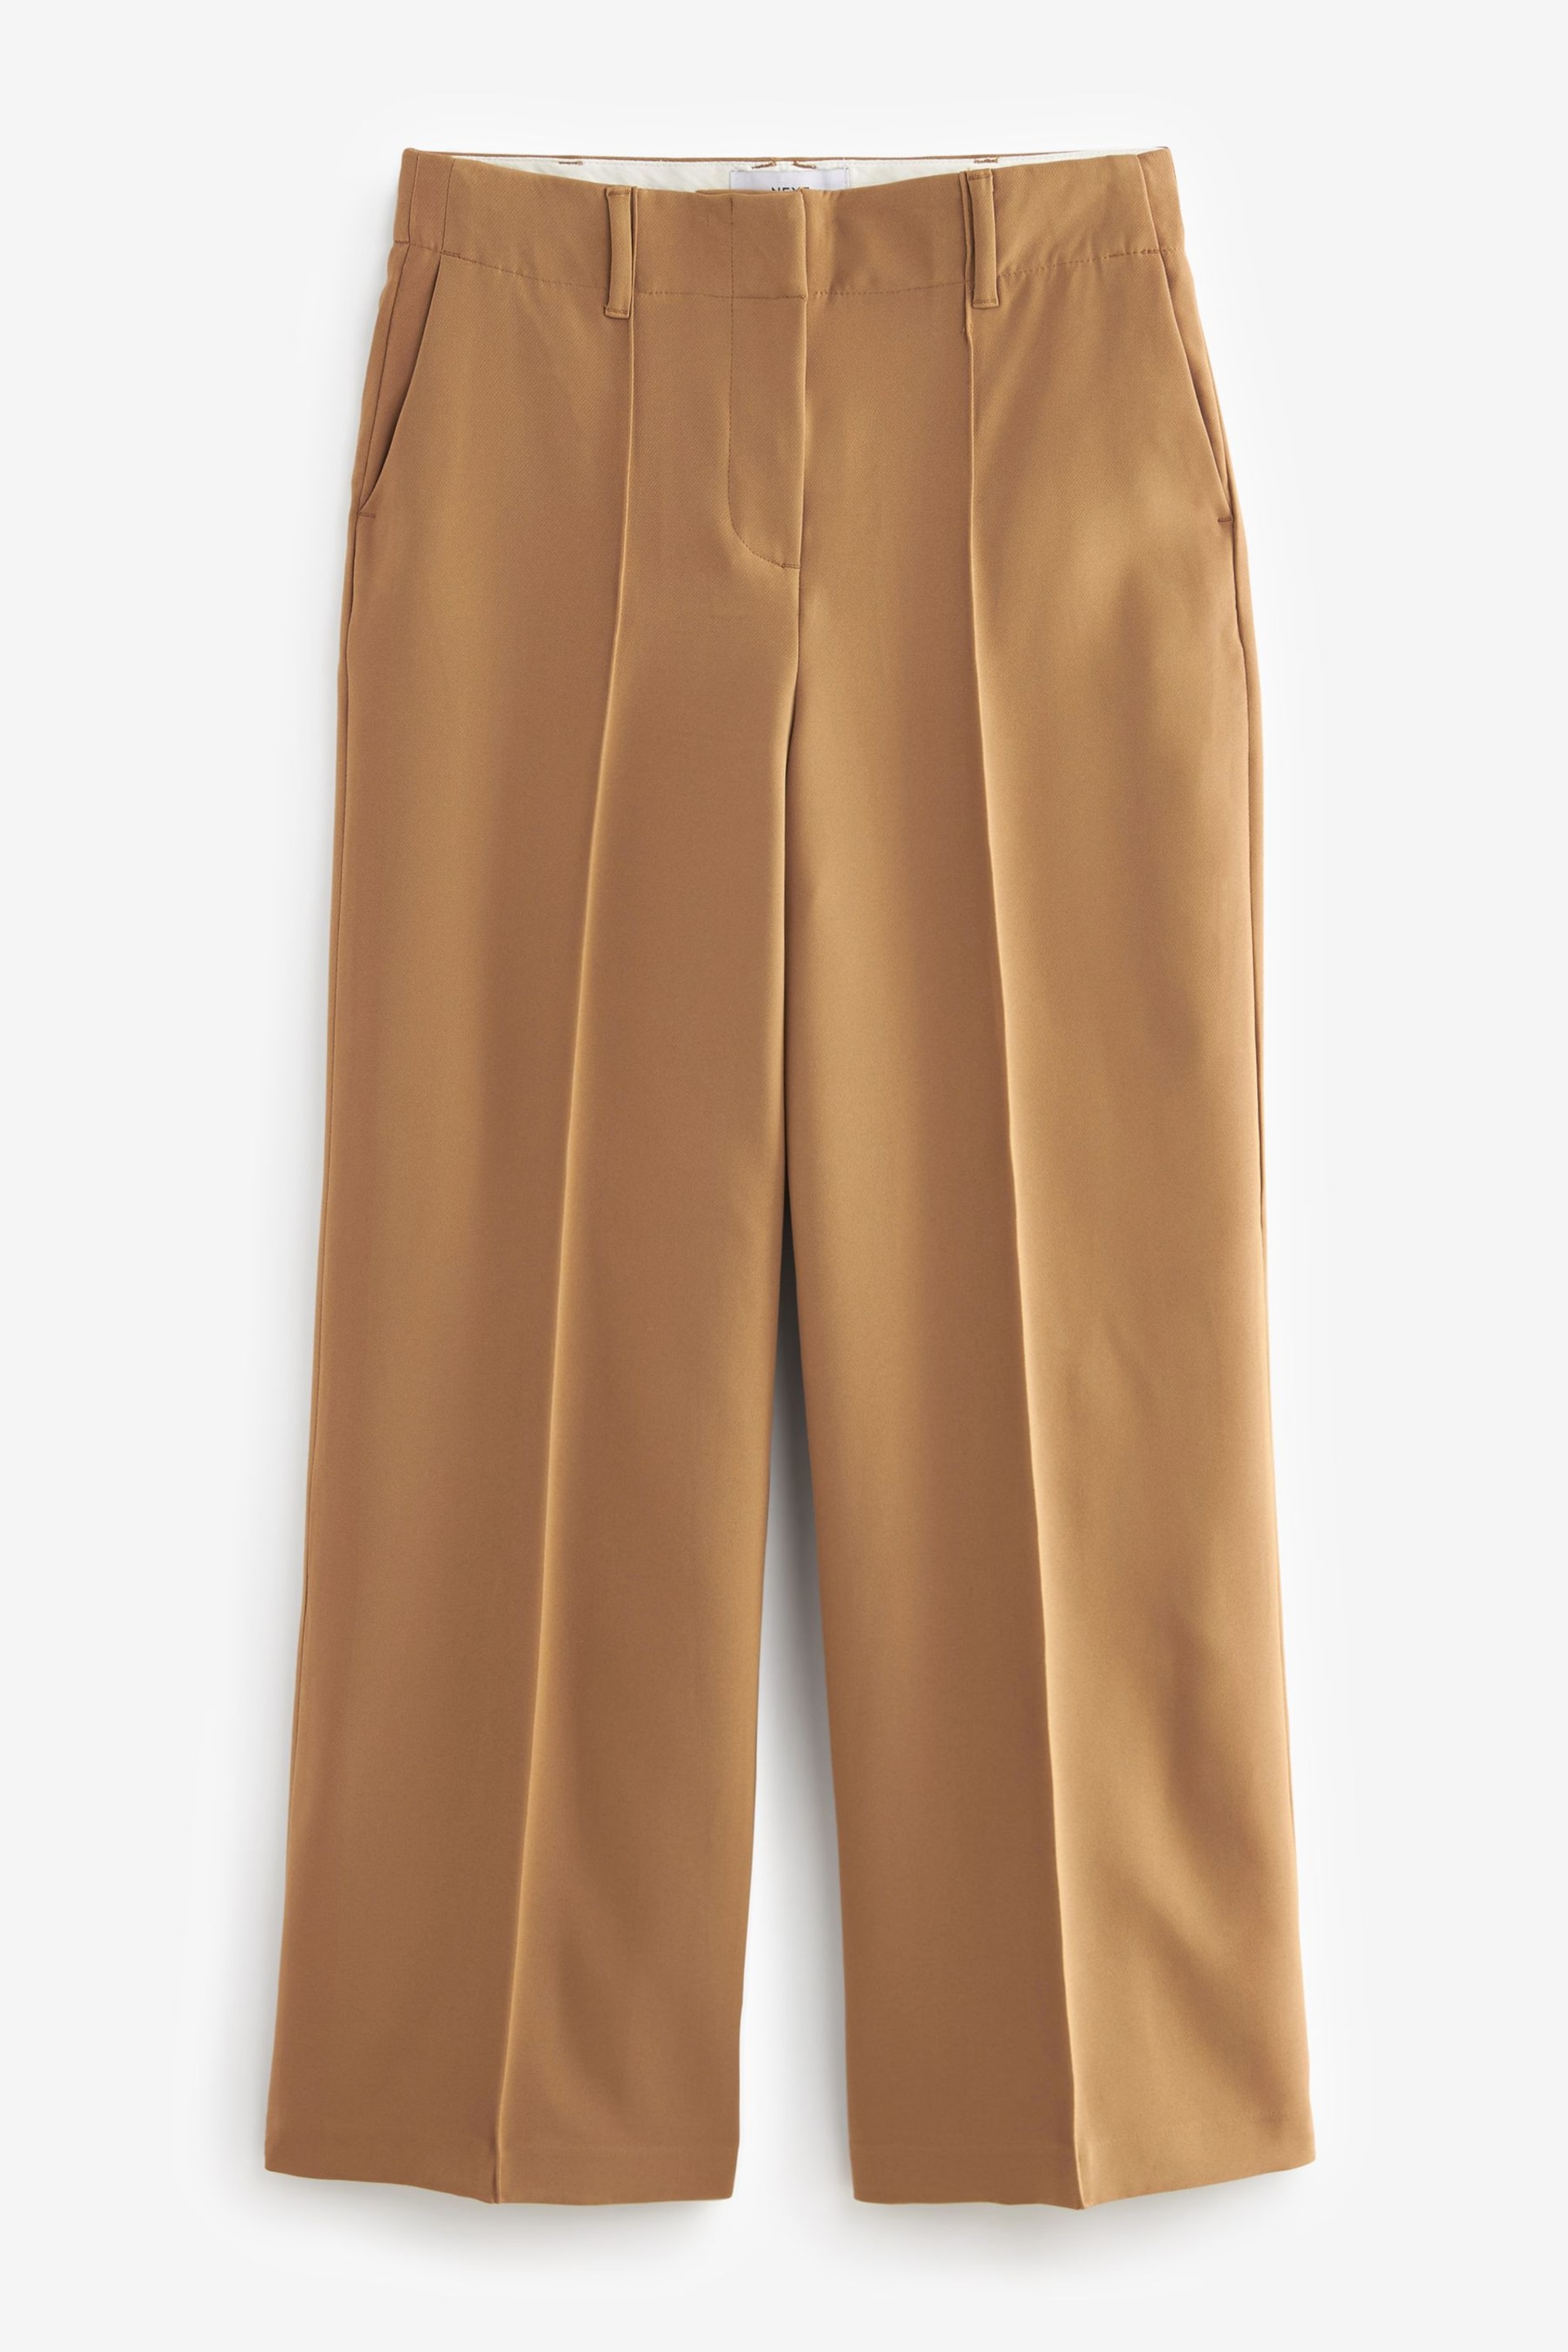 Camel Tailored Mid Rise Wide Leg Trousers - Image 6 of 7